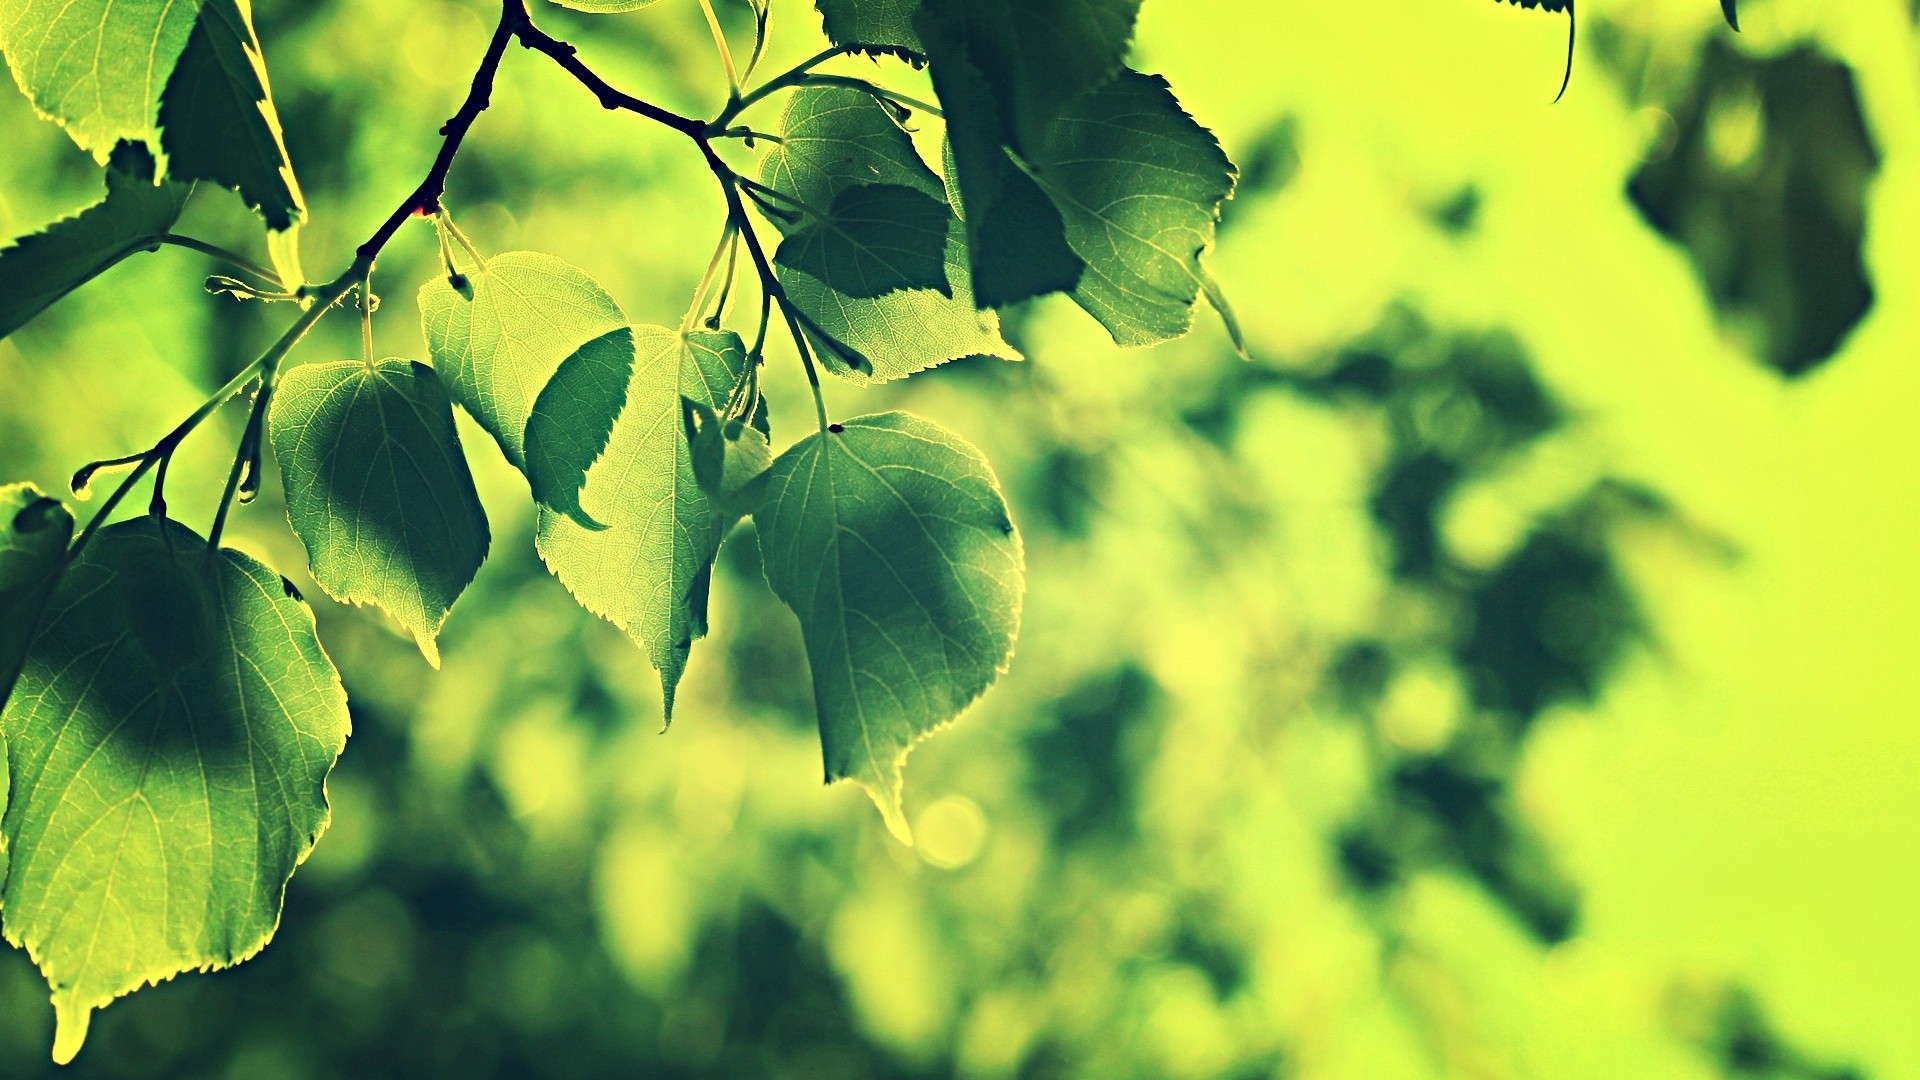 General 1920x1080 nature leaves plants branch green